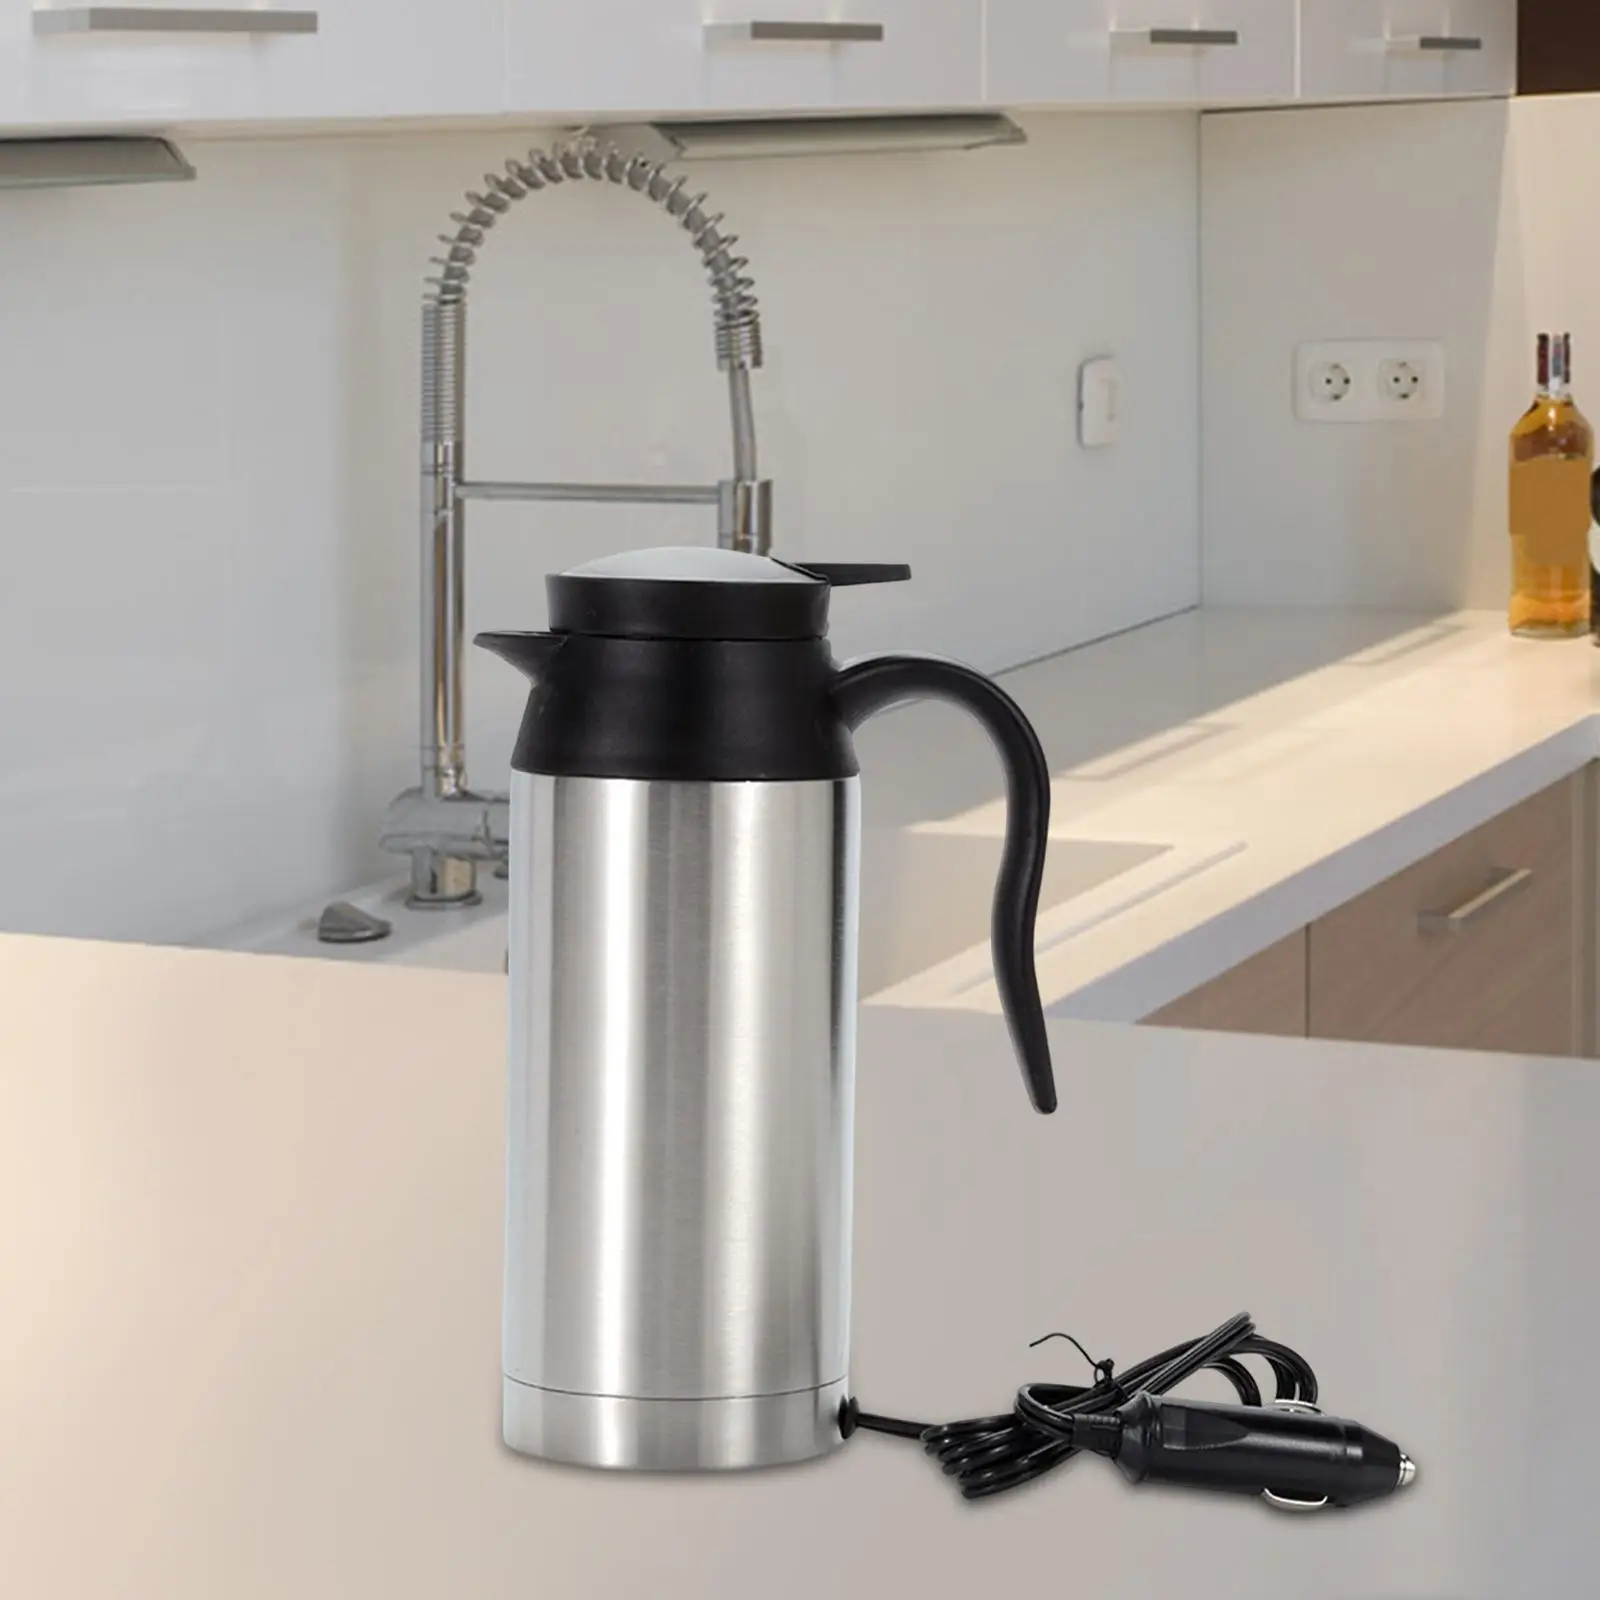 Portable 750ml Stainless Steel Electric Car Kettle Heating Cup Easily Clean ,Good Sealing Performance to Keep Water Warm